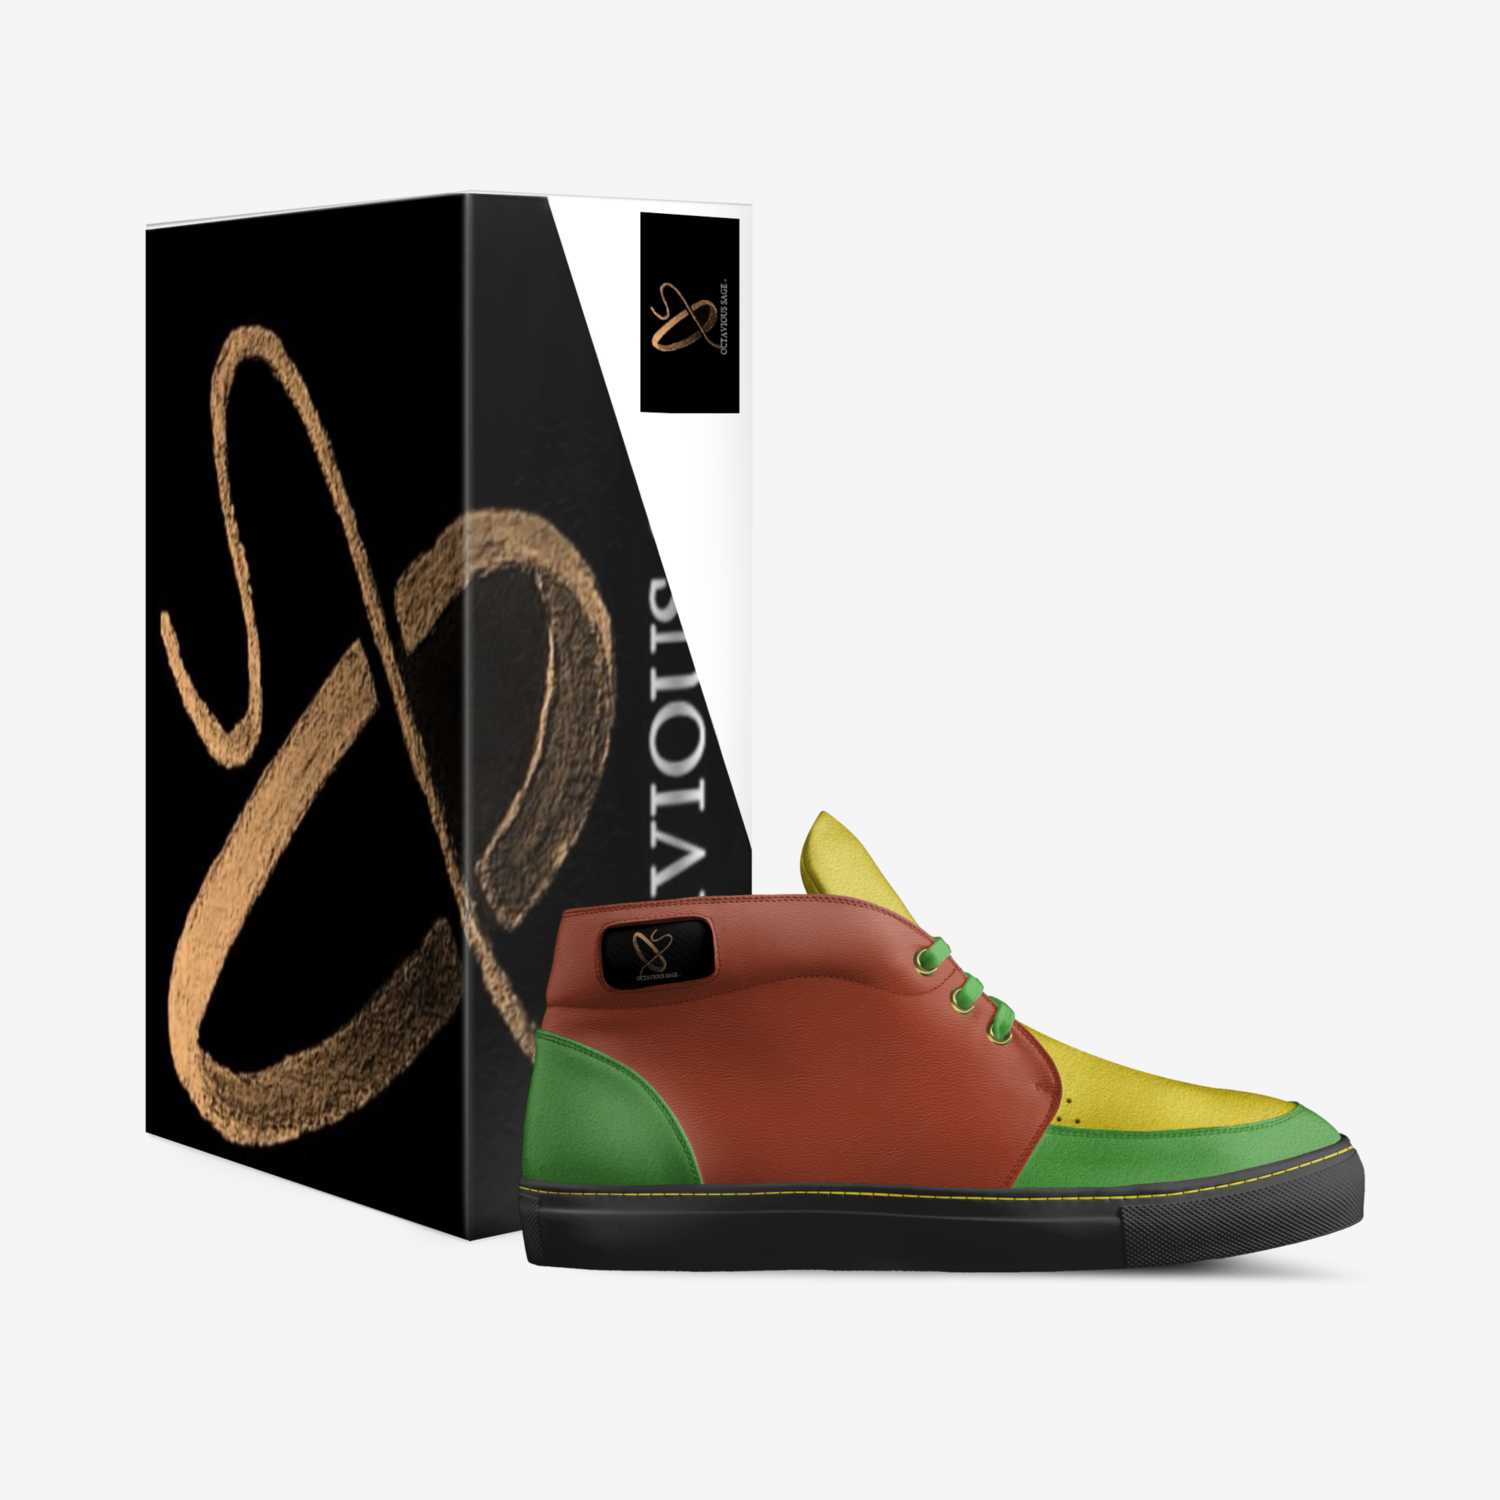 Octavious Sage custom made in Italy shoes by Octavious Sage | Box view